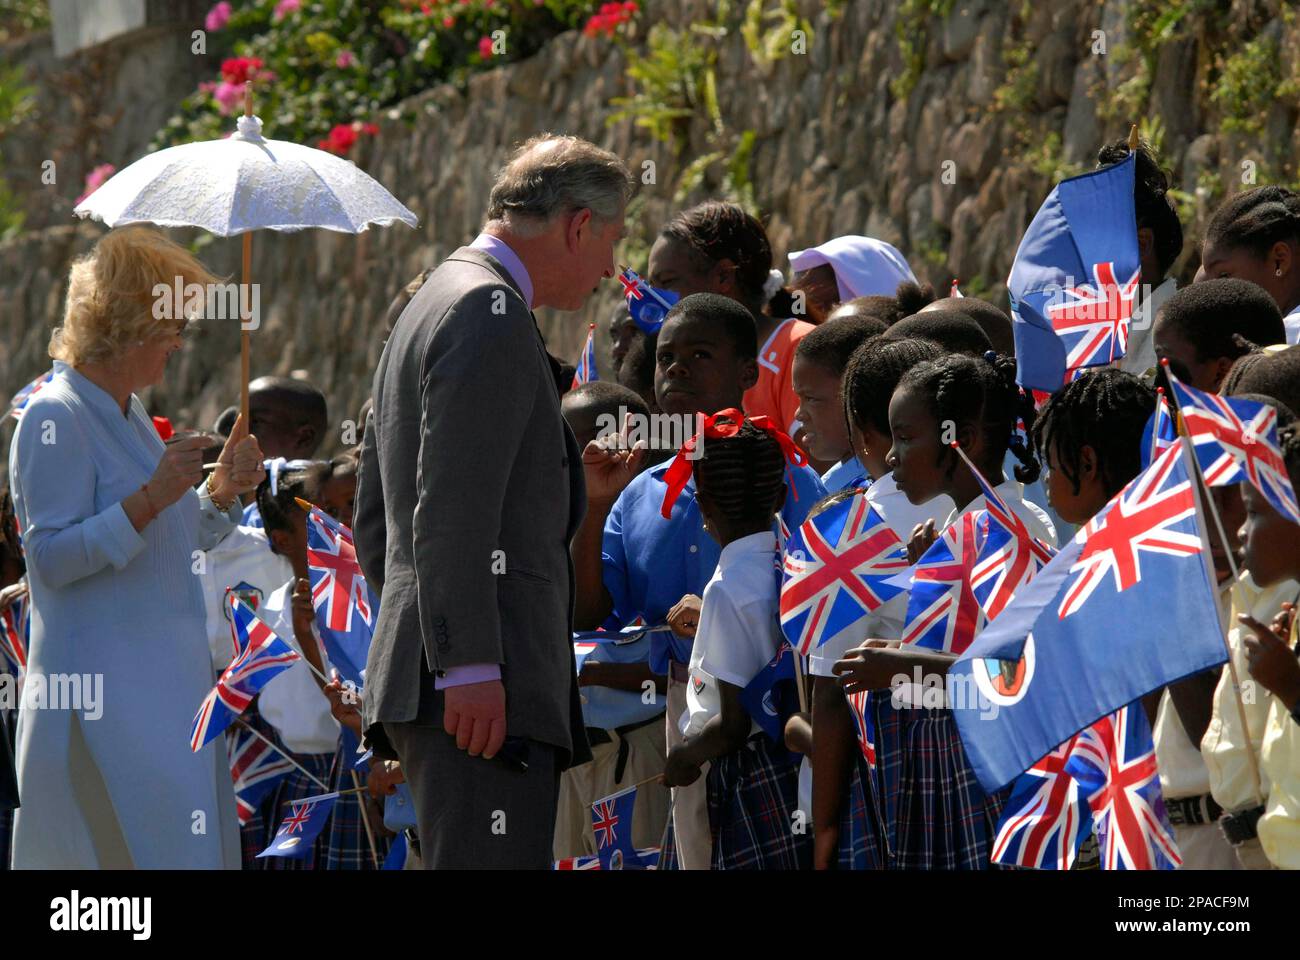 Britain's Prince Charles, center, speaks to school children upon their arrival to Little Bay, in the Caribbean island of Montserrat, Saturday, March 8, 2008, accompanied by his wife Camilla, the Duchess of Cornwall, left. Both toured the area that was devastated by the eruption of the Soufriere Hills volcano a decade ago, as part of a five-island Caribbean tour. (AP Photo/Wayne Fenton) Stock Photo